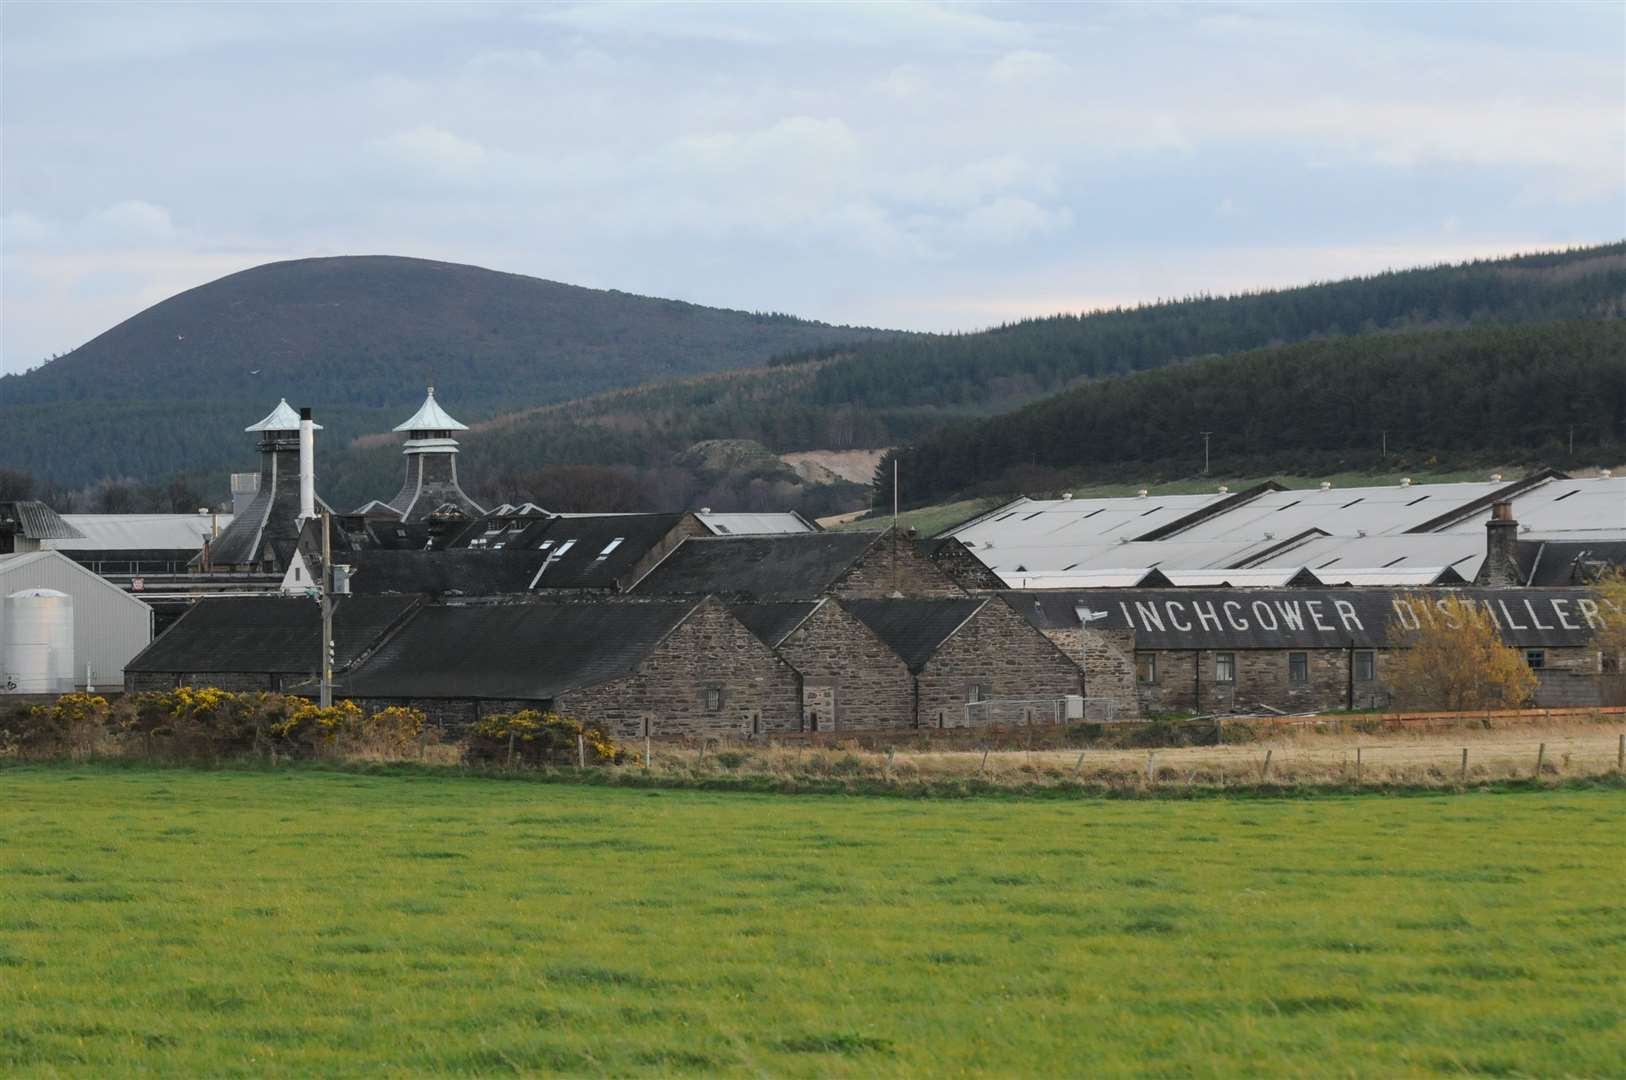 Inchgower Distillery on the outskirts of Buckie